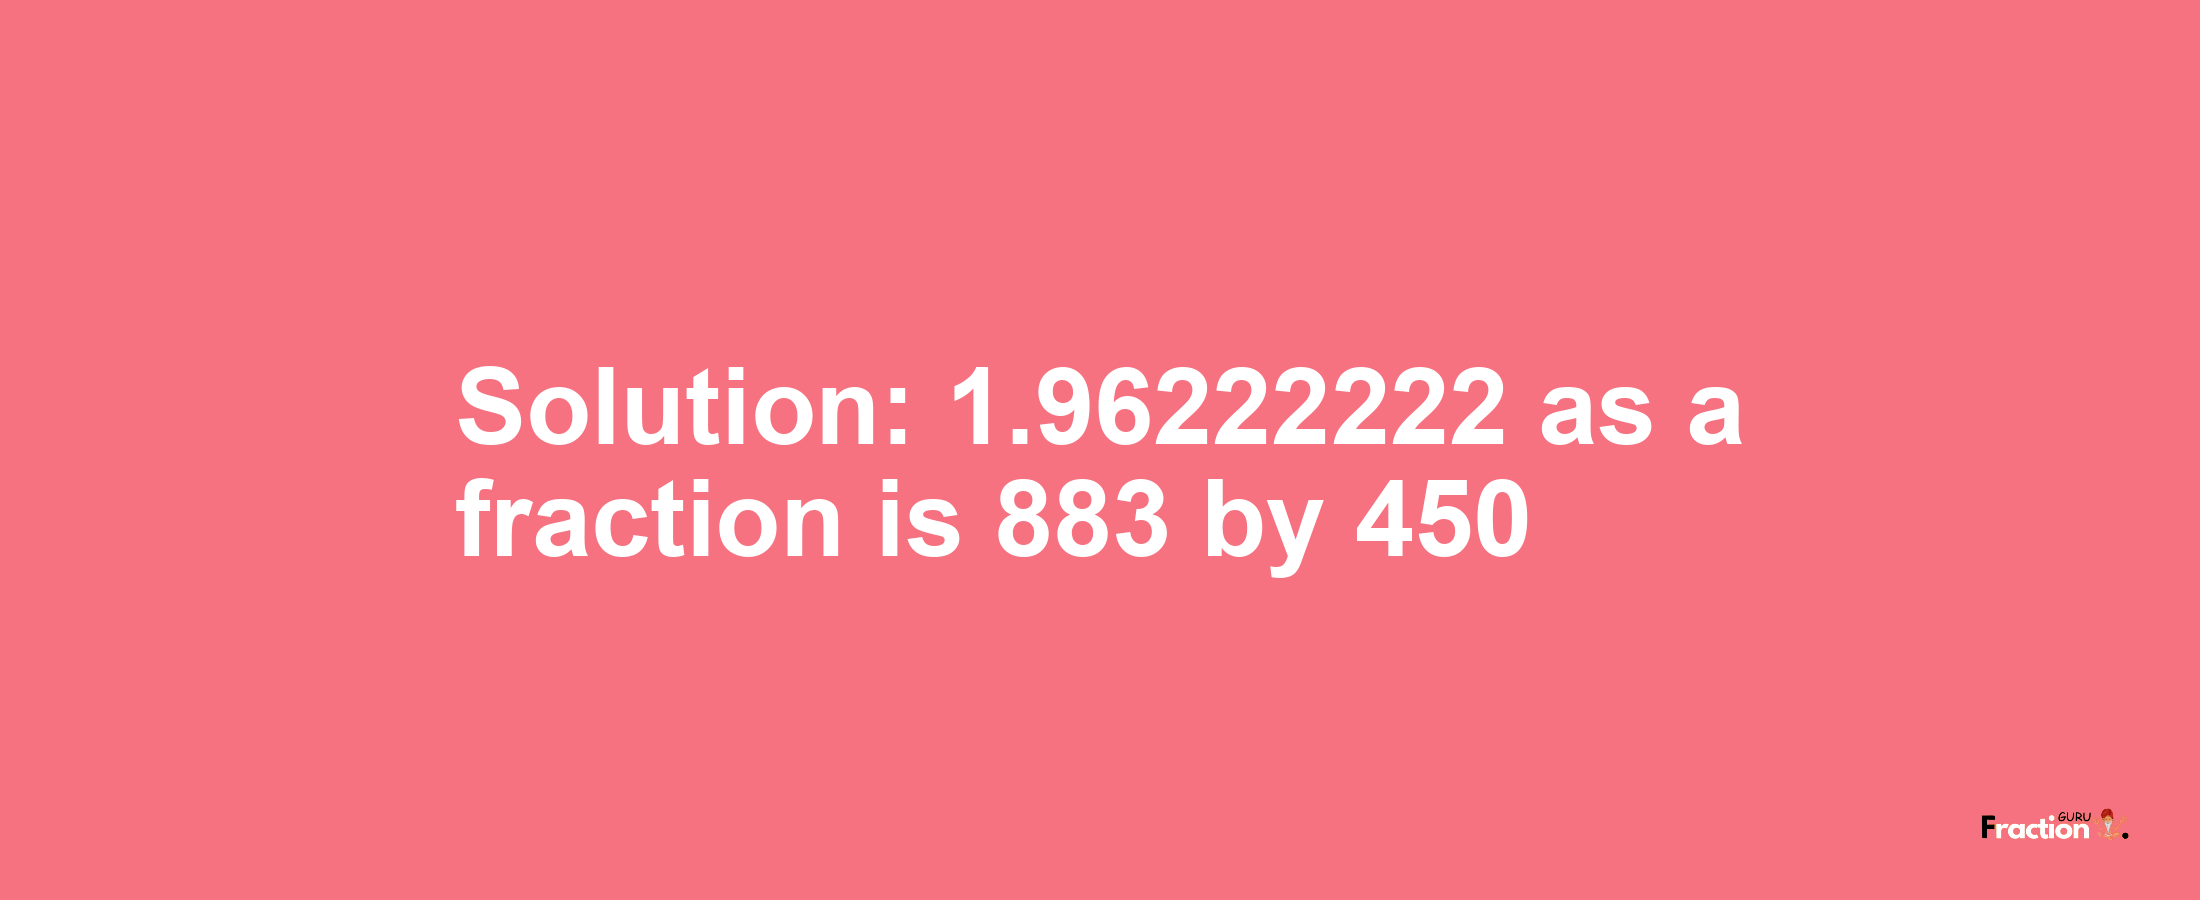 Solution:1.96222222 as a fraction is 883/450